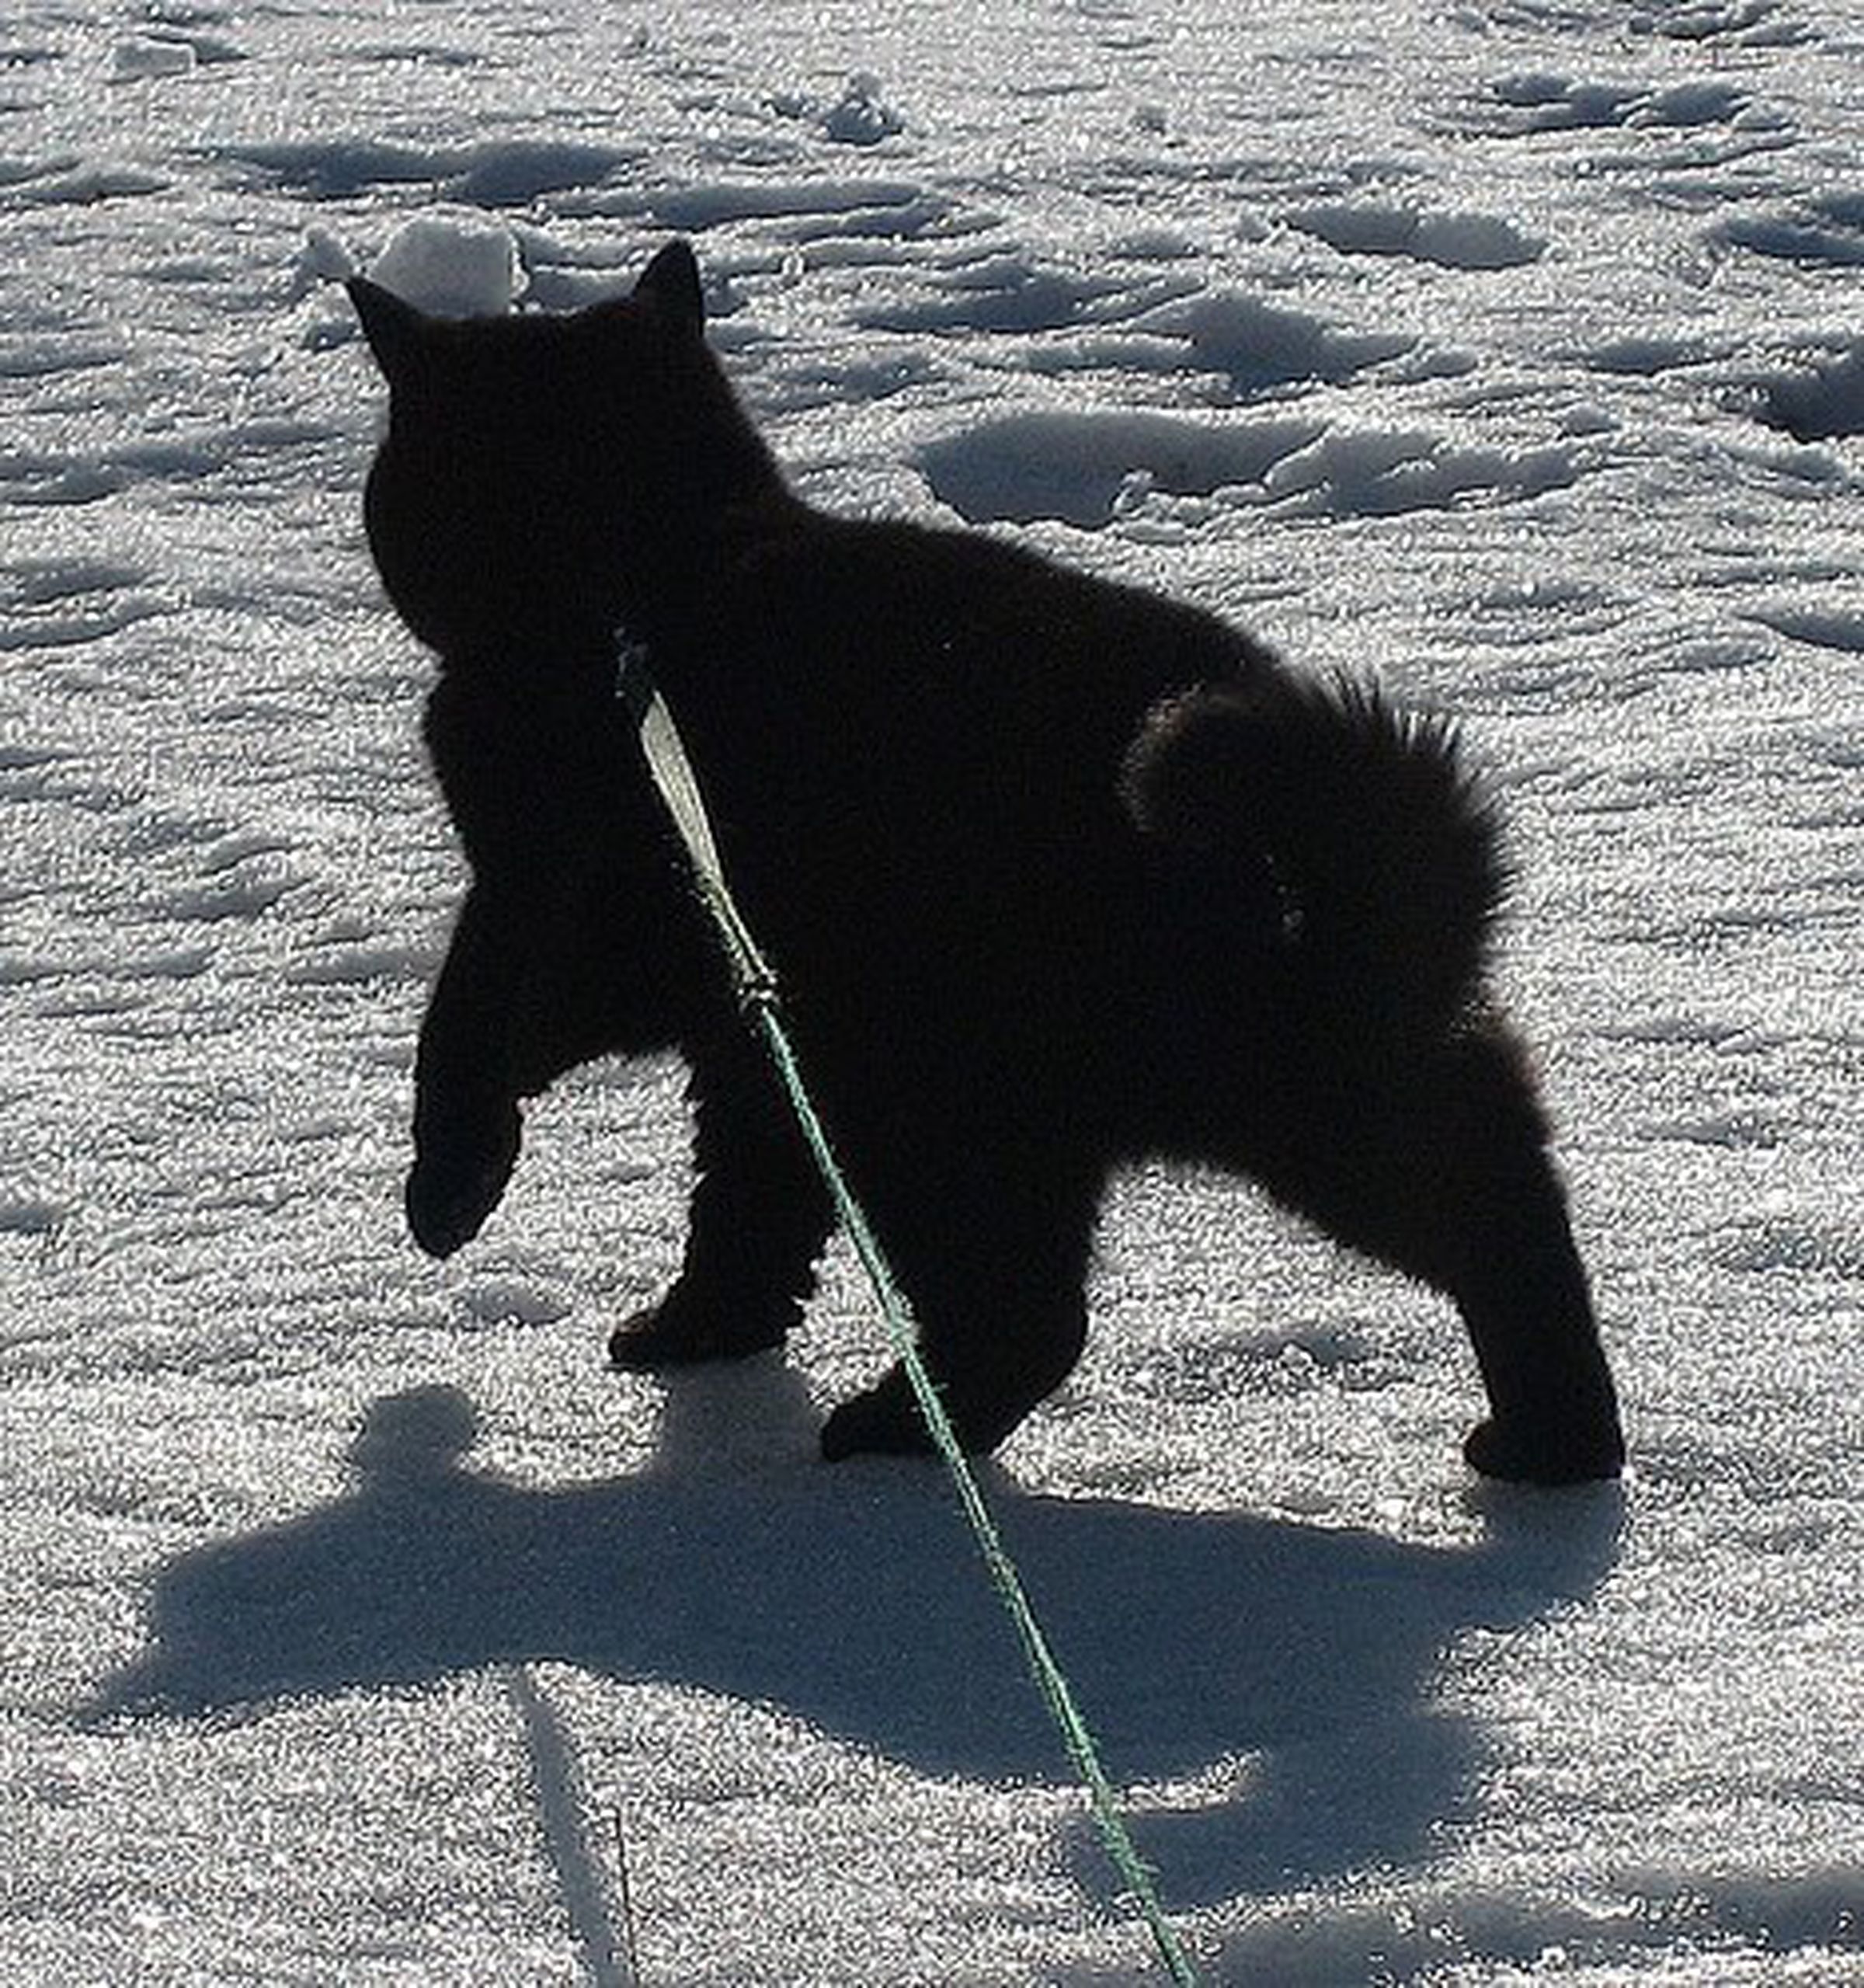 AI thought this was a “black bear,” but that doesn’t explain the leash. 